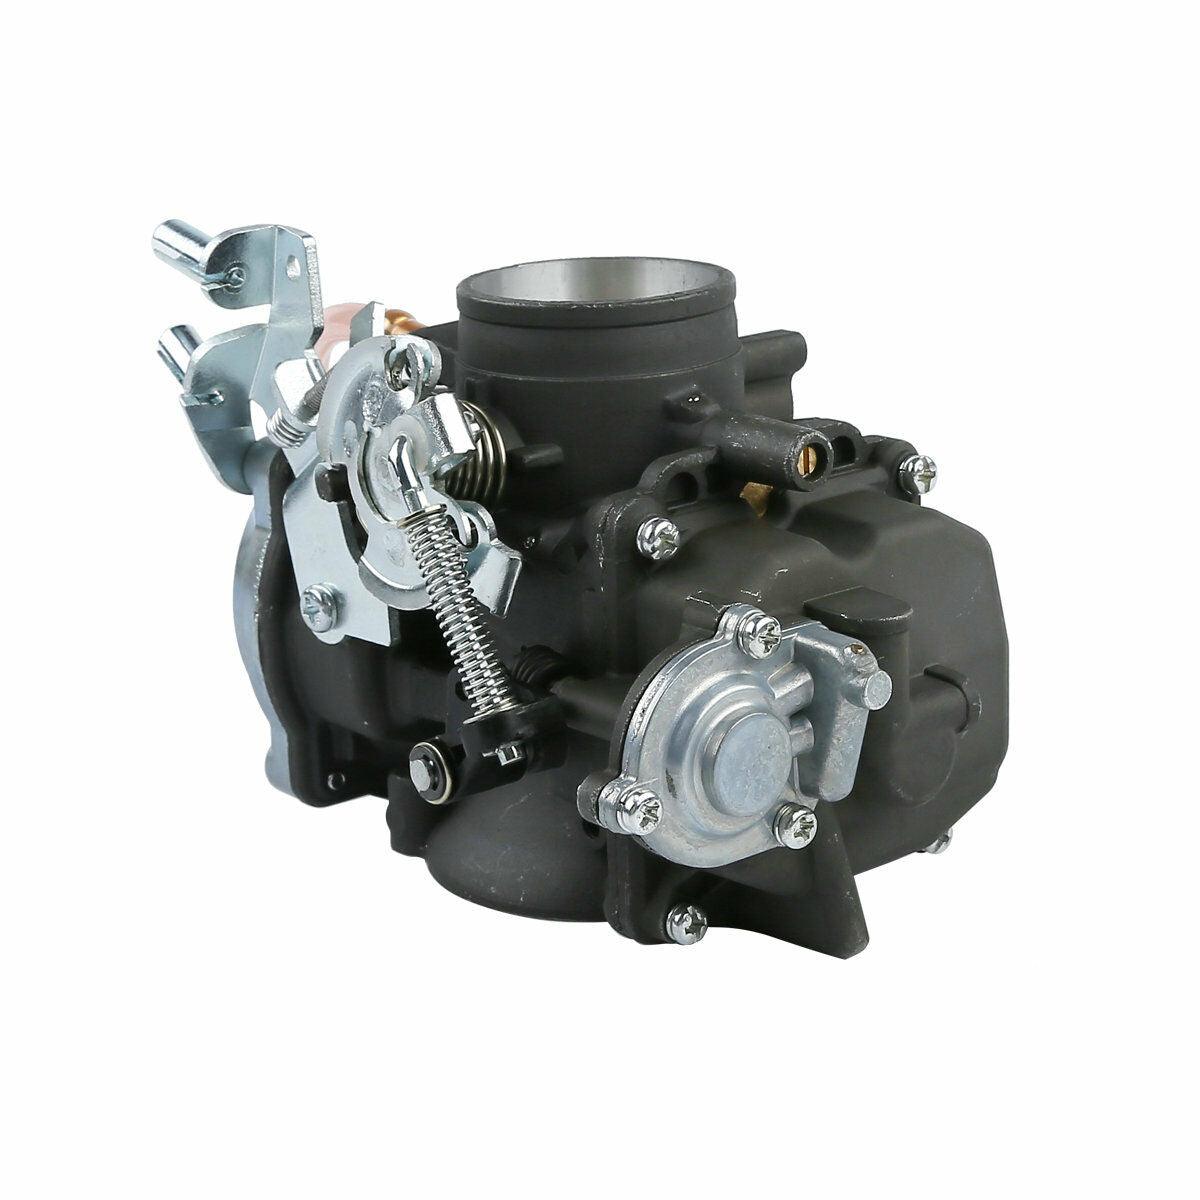 Carburetor Carb Fit For Harley Dyna Super Glide Softail Springer FXST Twin Cam - Moto Life Products